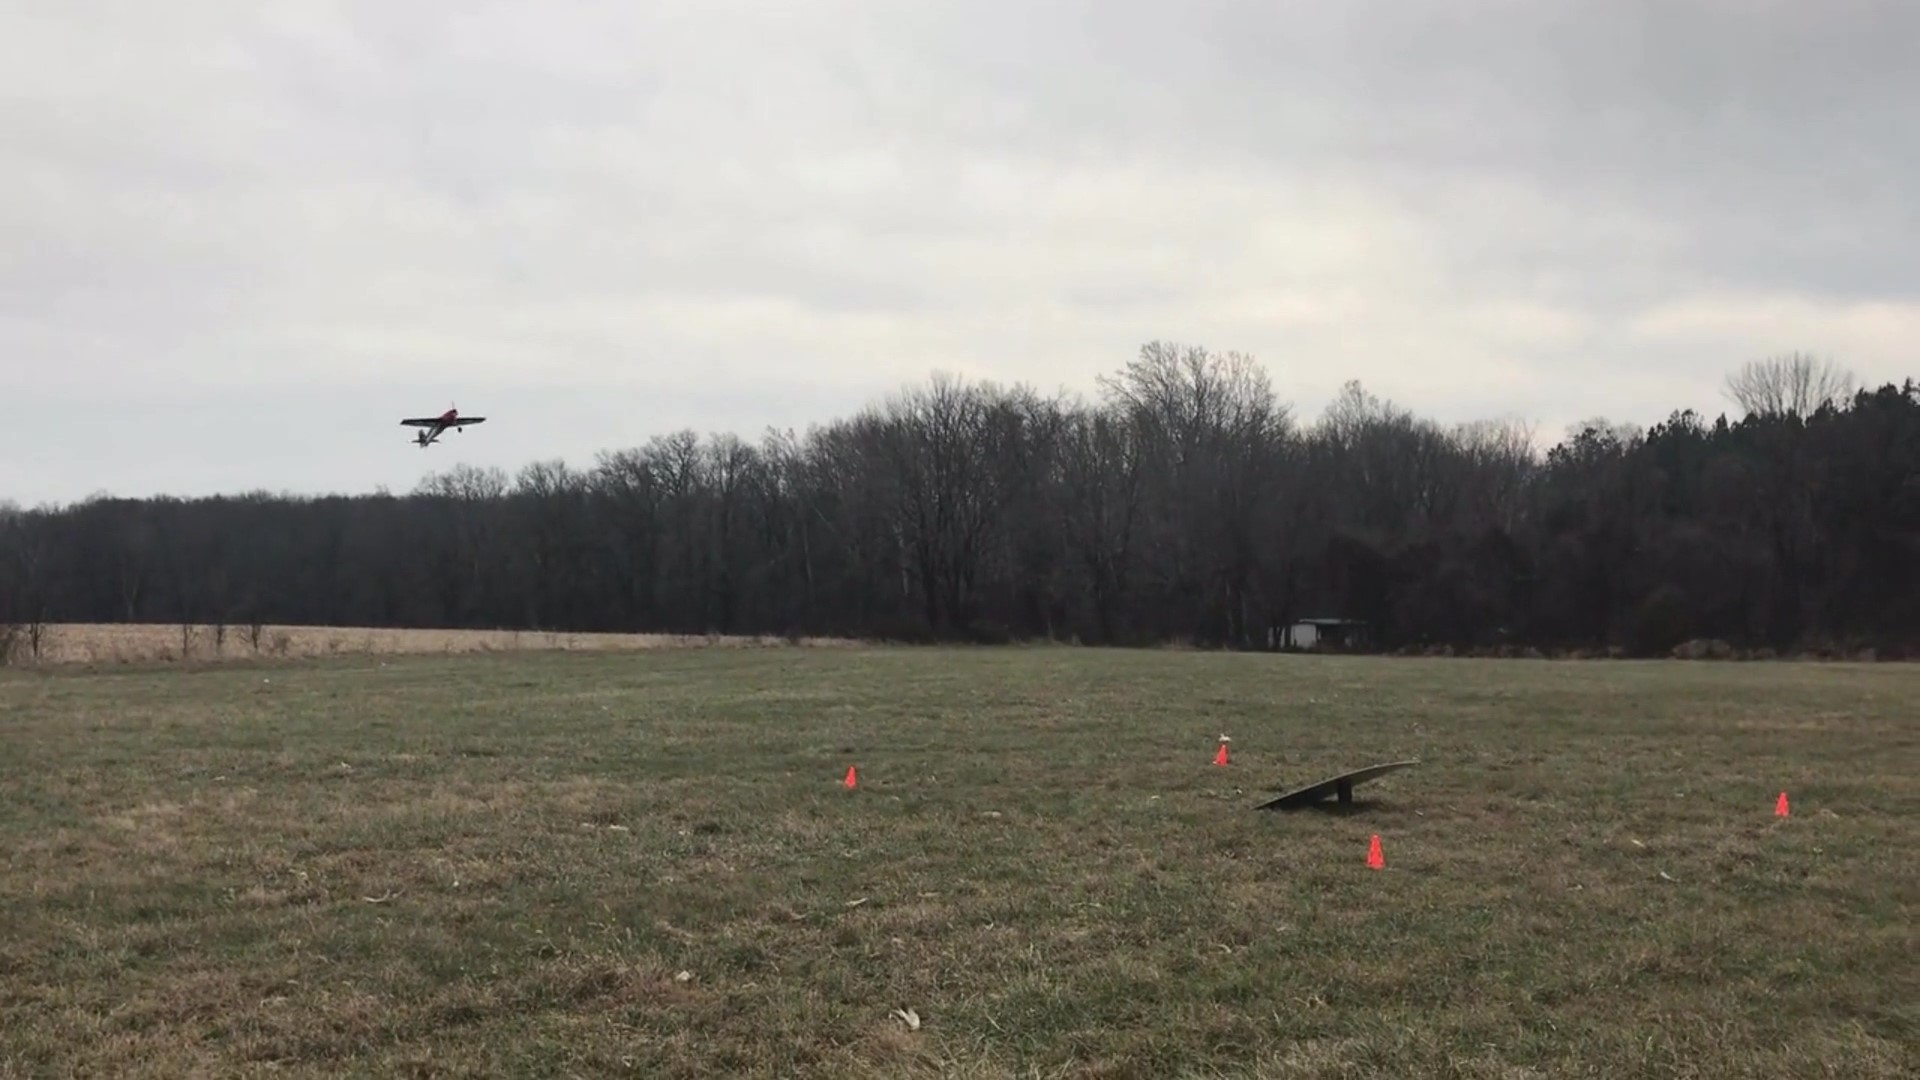 The algorithm was tested on a 60-inch wingspan, 4.5 kg fixed-wing UAV and demonstrated precision landing in variable wind. 